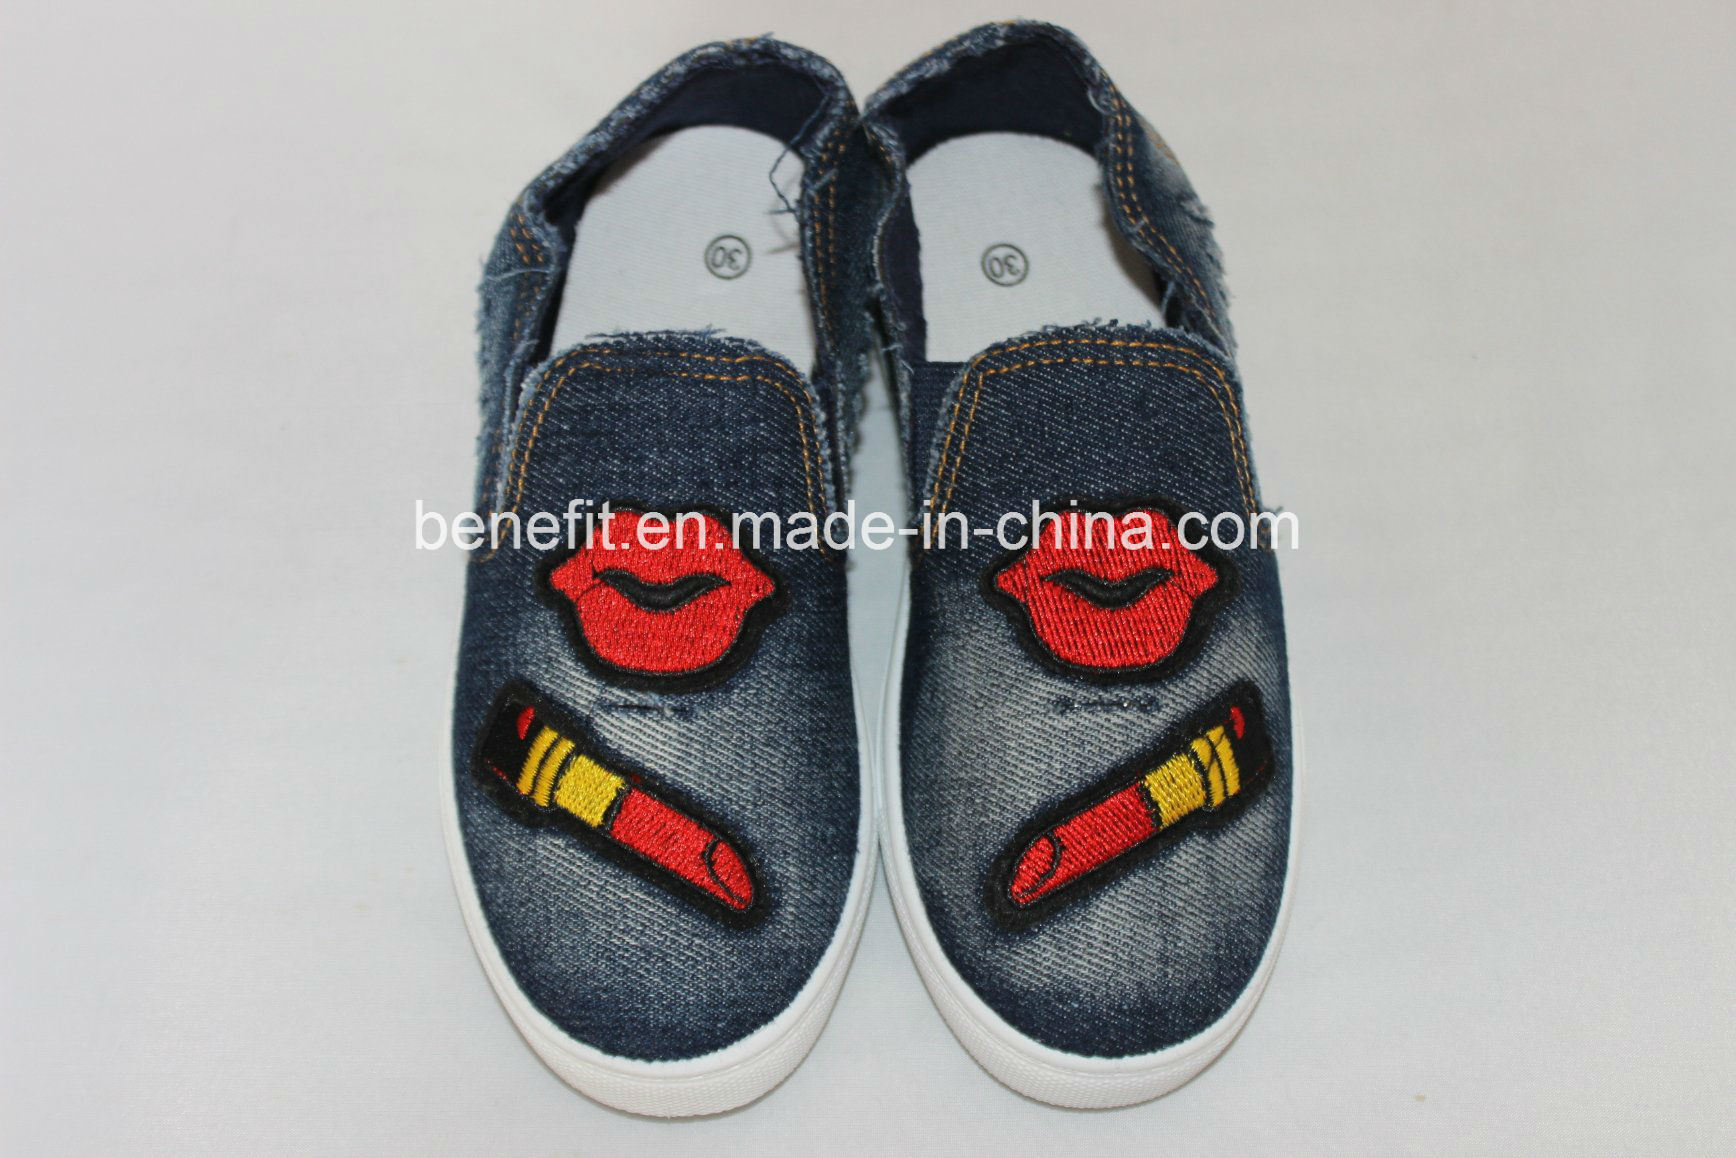 Children's Canvas Shoes with Beautiful Decoration